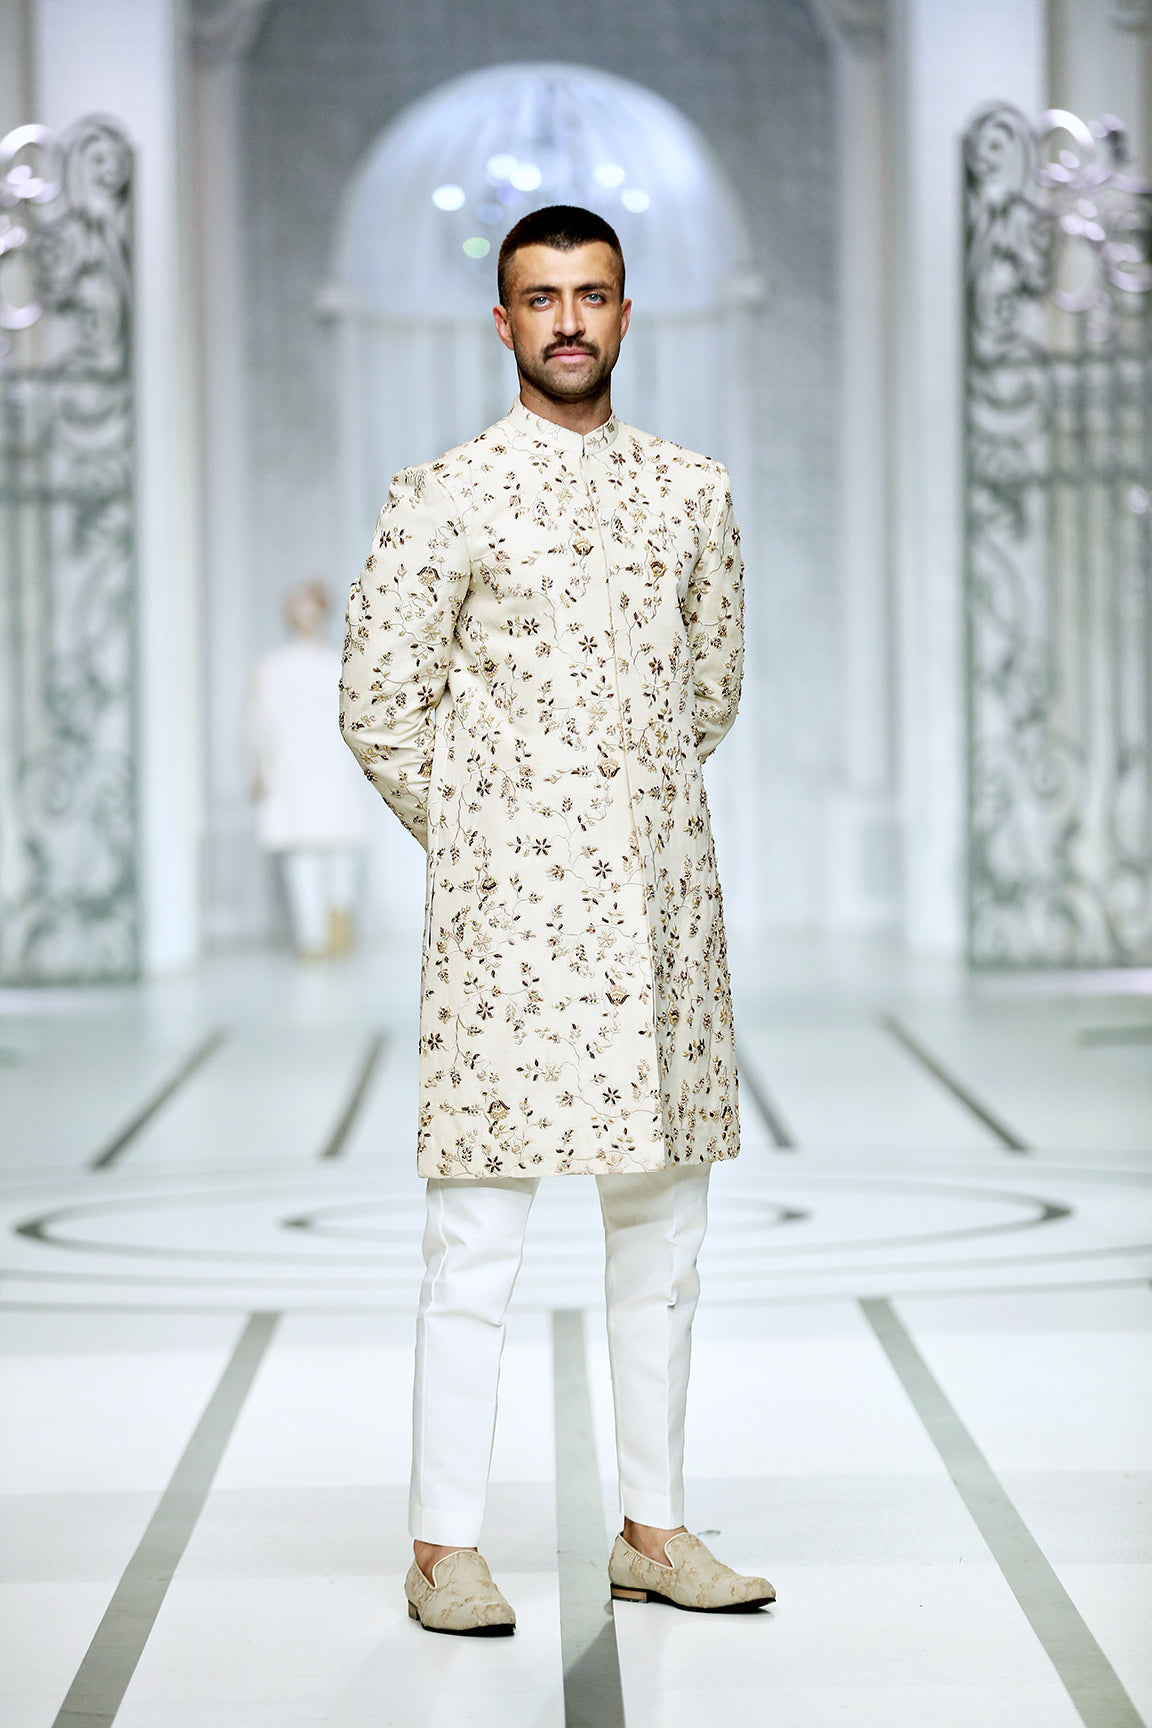 BCW 36 Pure Gold Hand Crafted Sherwani For Groom